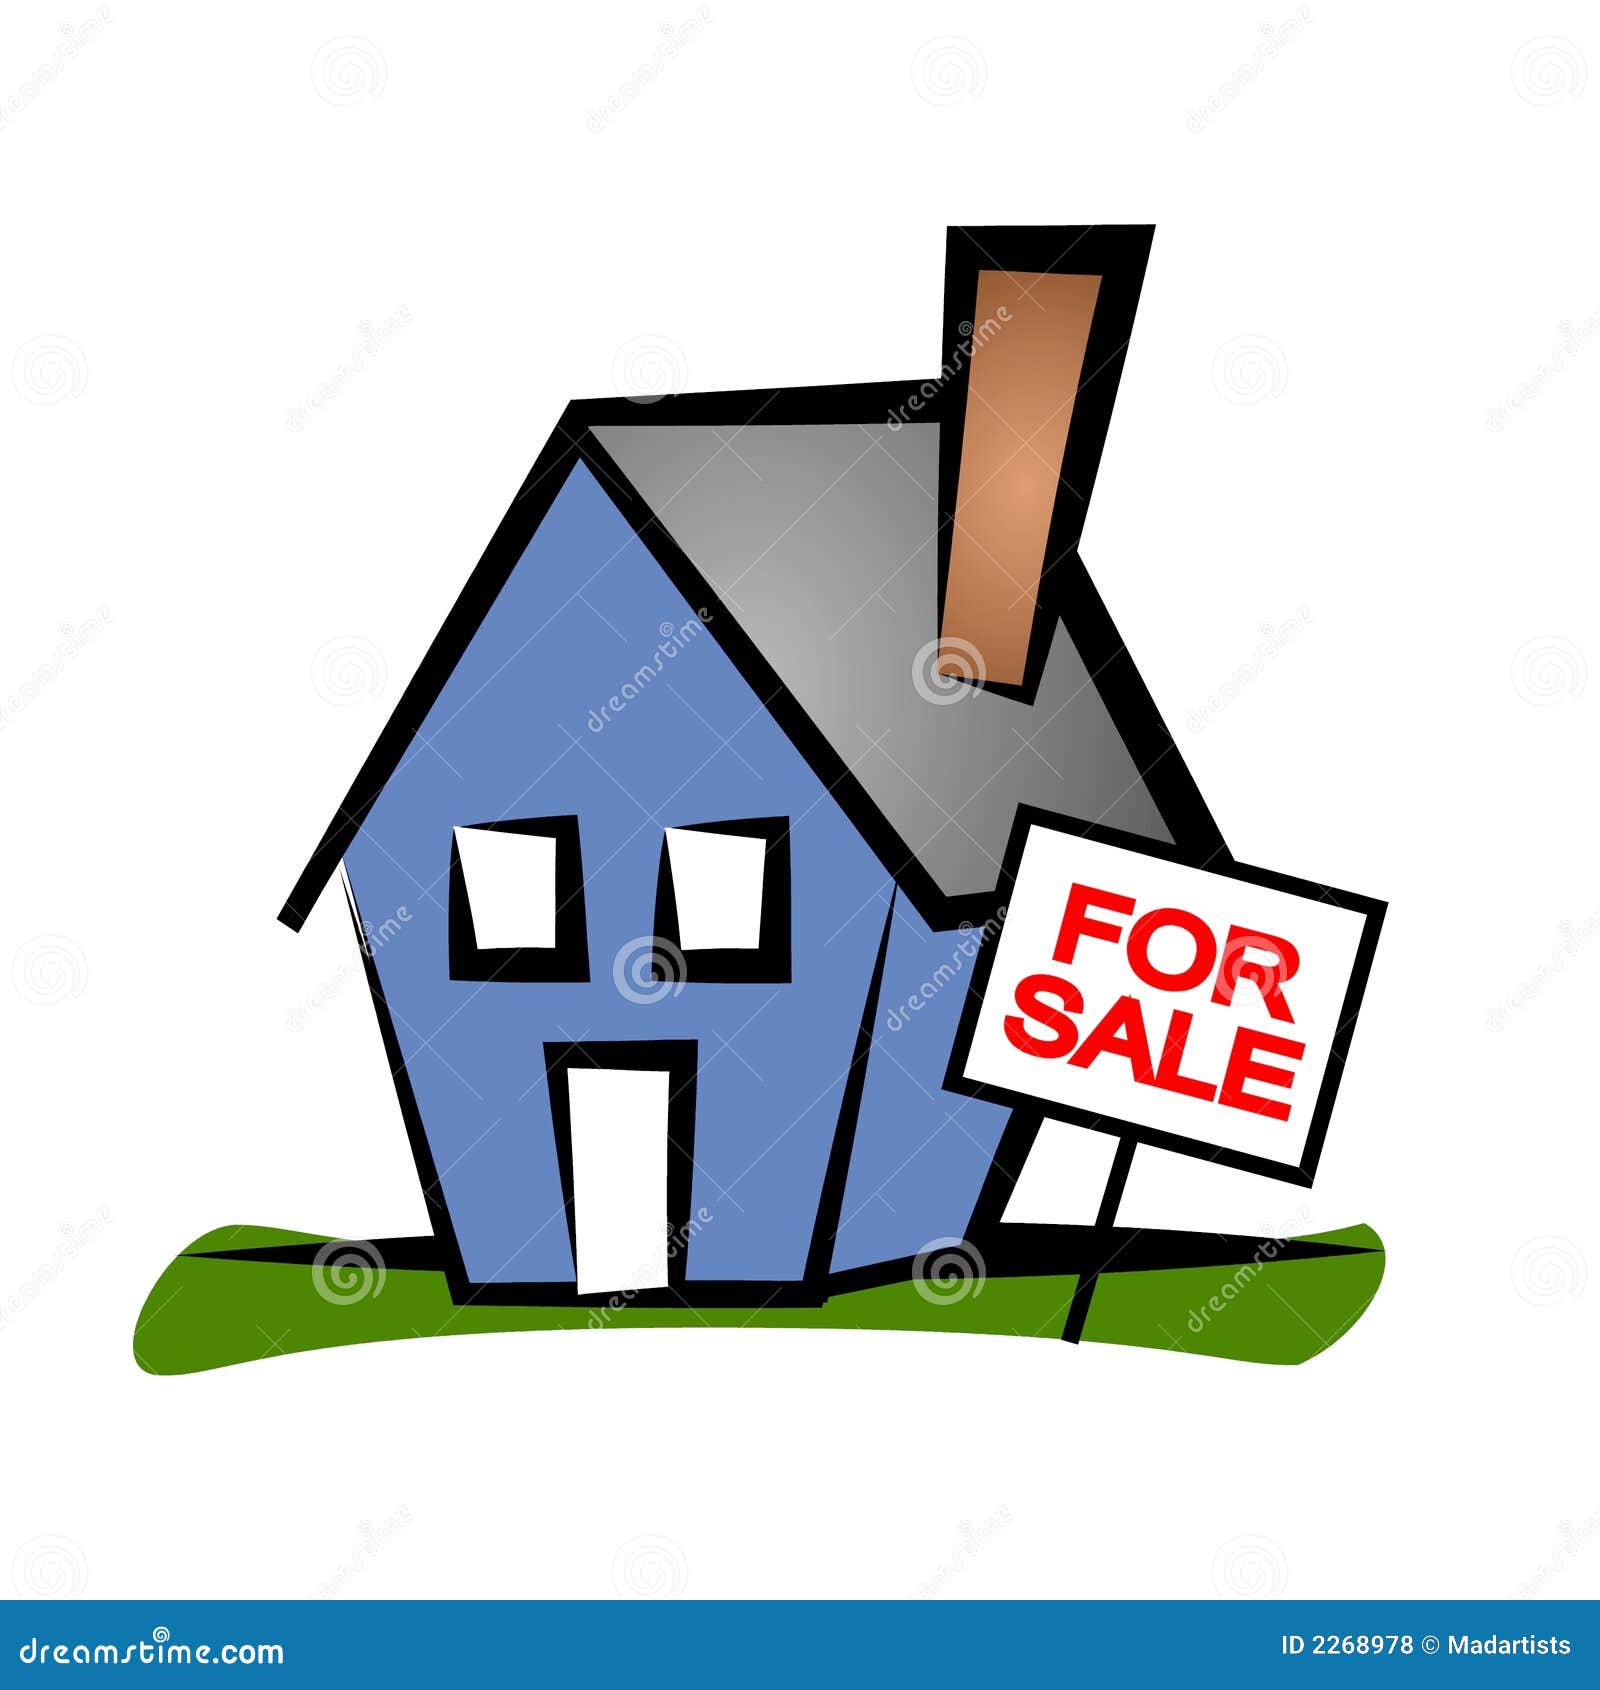 house for sale logo